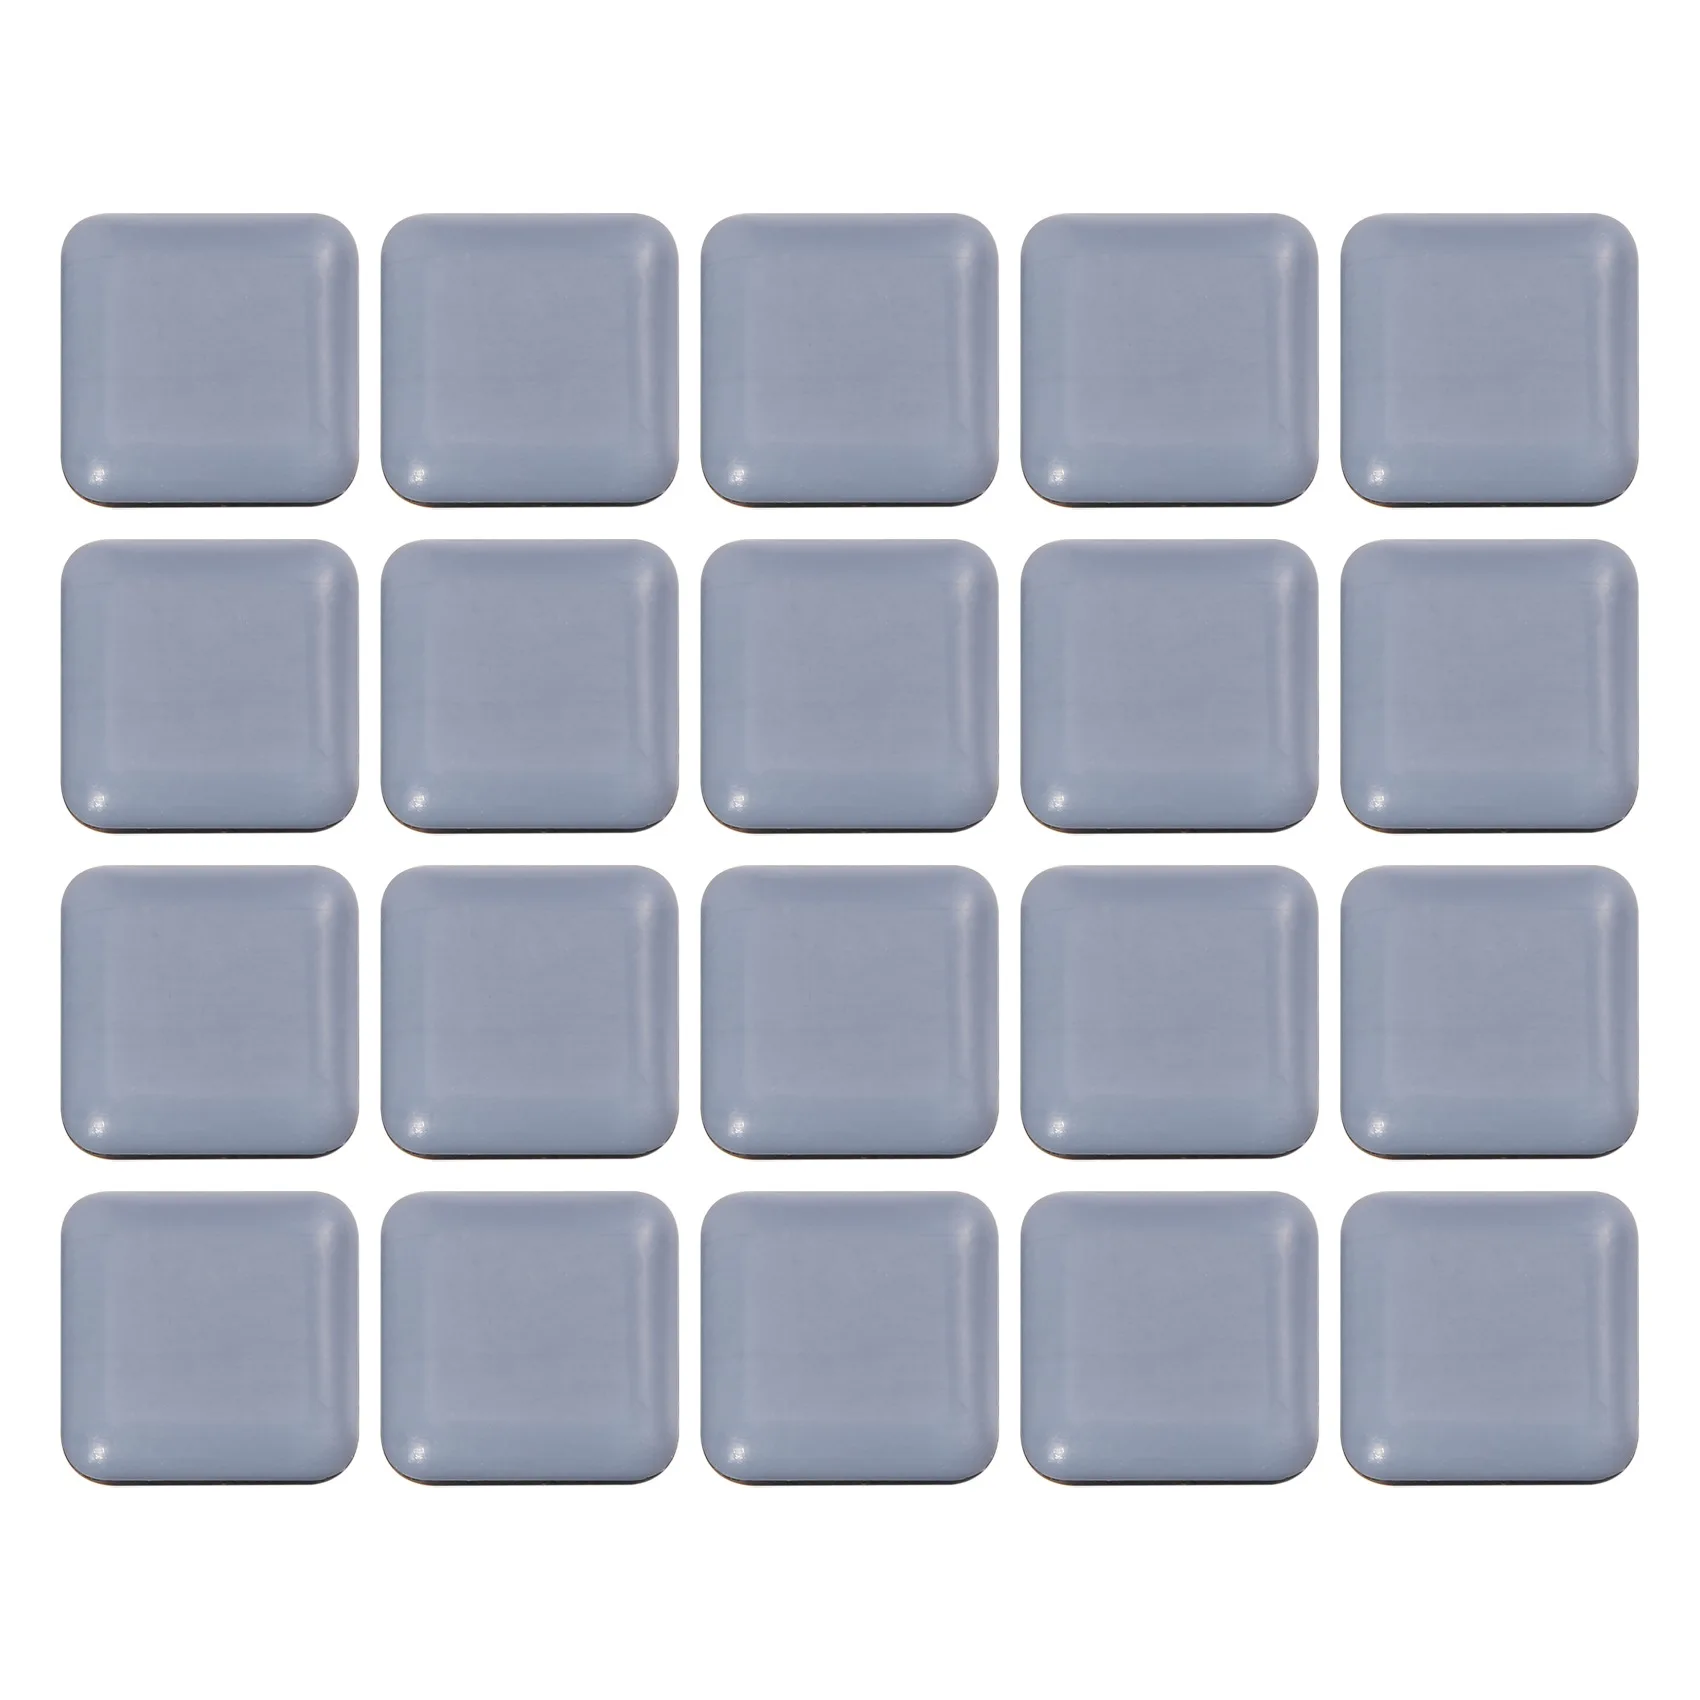 

20 PCS Furniture Gliders Slider 25 x 25 mm PTFE Self Adhesive Furniture Moving Pads Square for Furniture Easy Movers